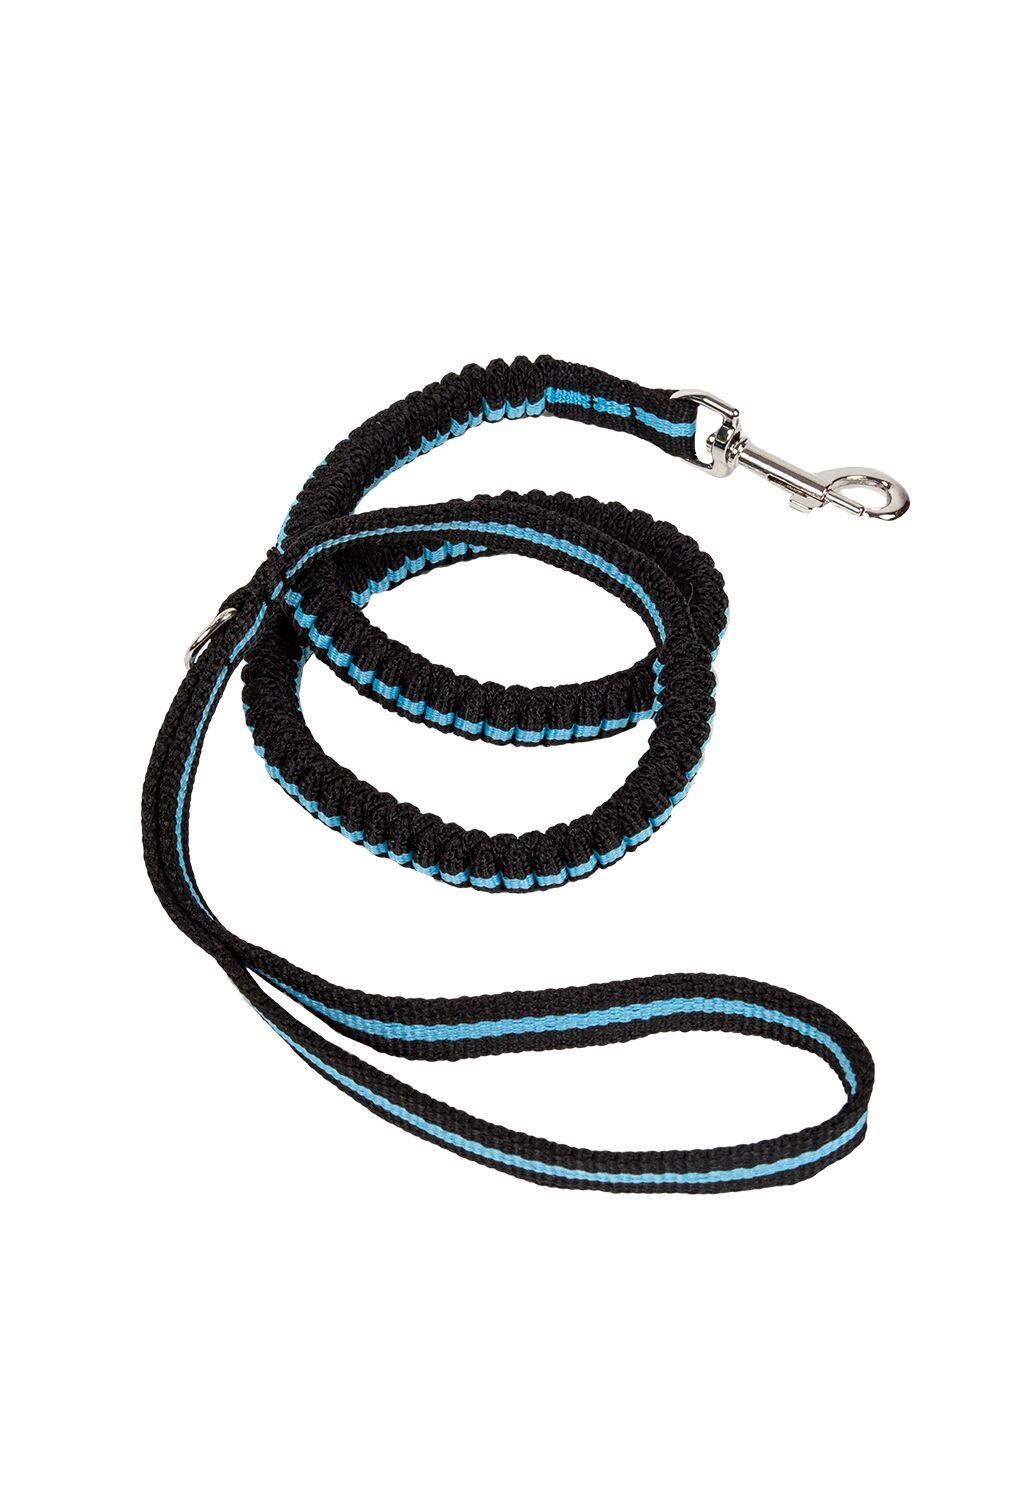 Picture of Pet Life LS11BL Retract A Wag Shock Absorption Dog Leash, Blue - One Size